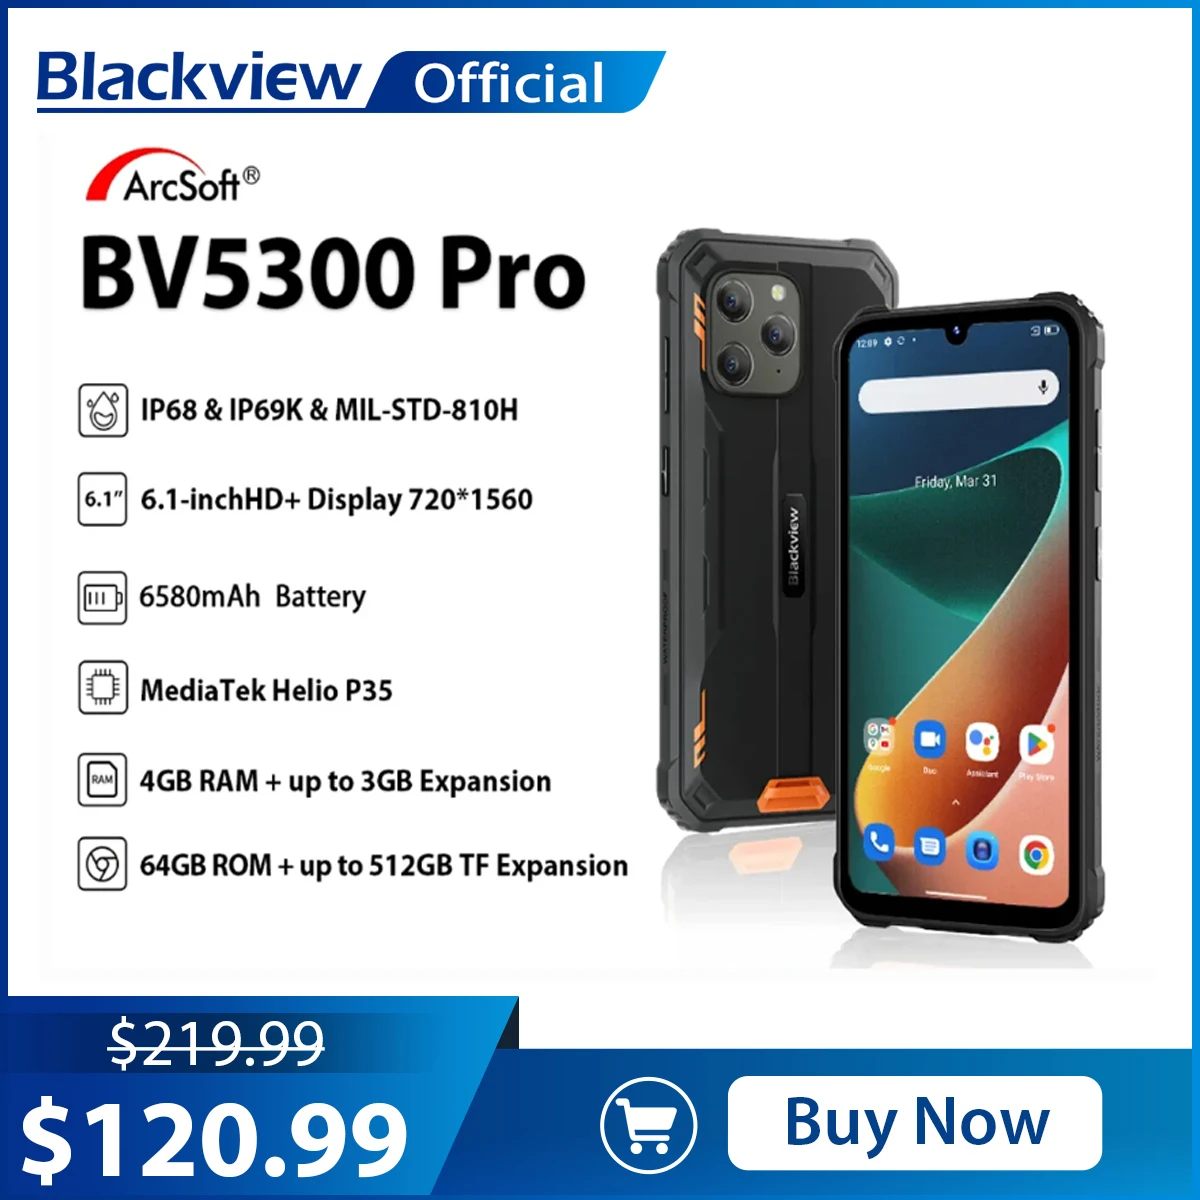 Blackview BV5300 Pro IP68 Waterproof Rugged Smartphone Android12 Phone P35 4GB 64GB Mobile Phone 13MP Camare 6580mAh Cellphone oukitel wp8 pro 6 49 inch mobile phone ip68 ip69k rugged waterproof smartphone android10 4gb 64gb cellphone 16mp camera 5000mah